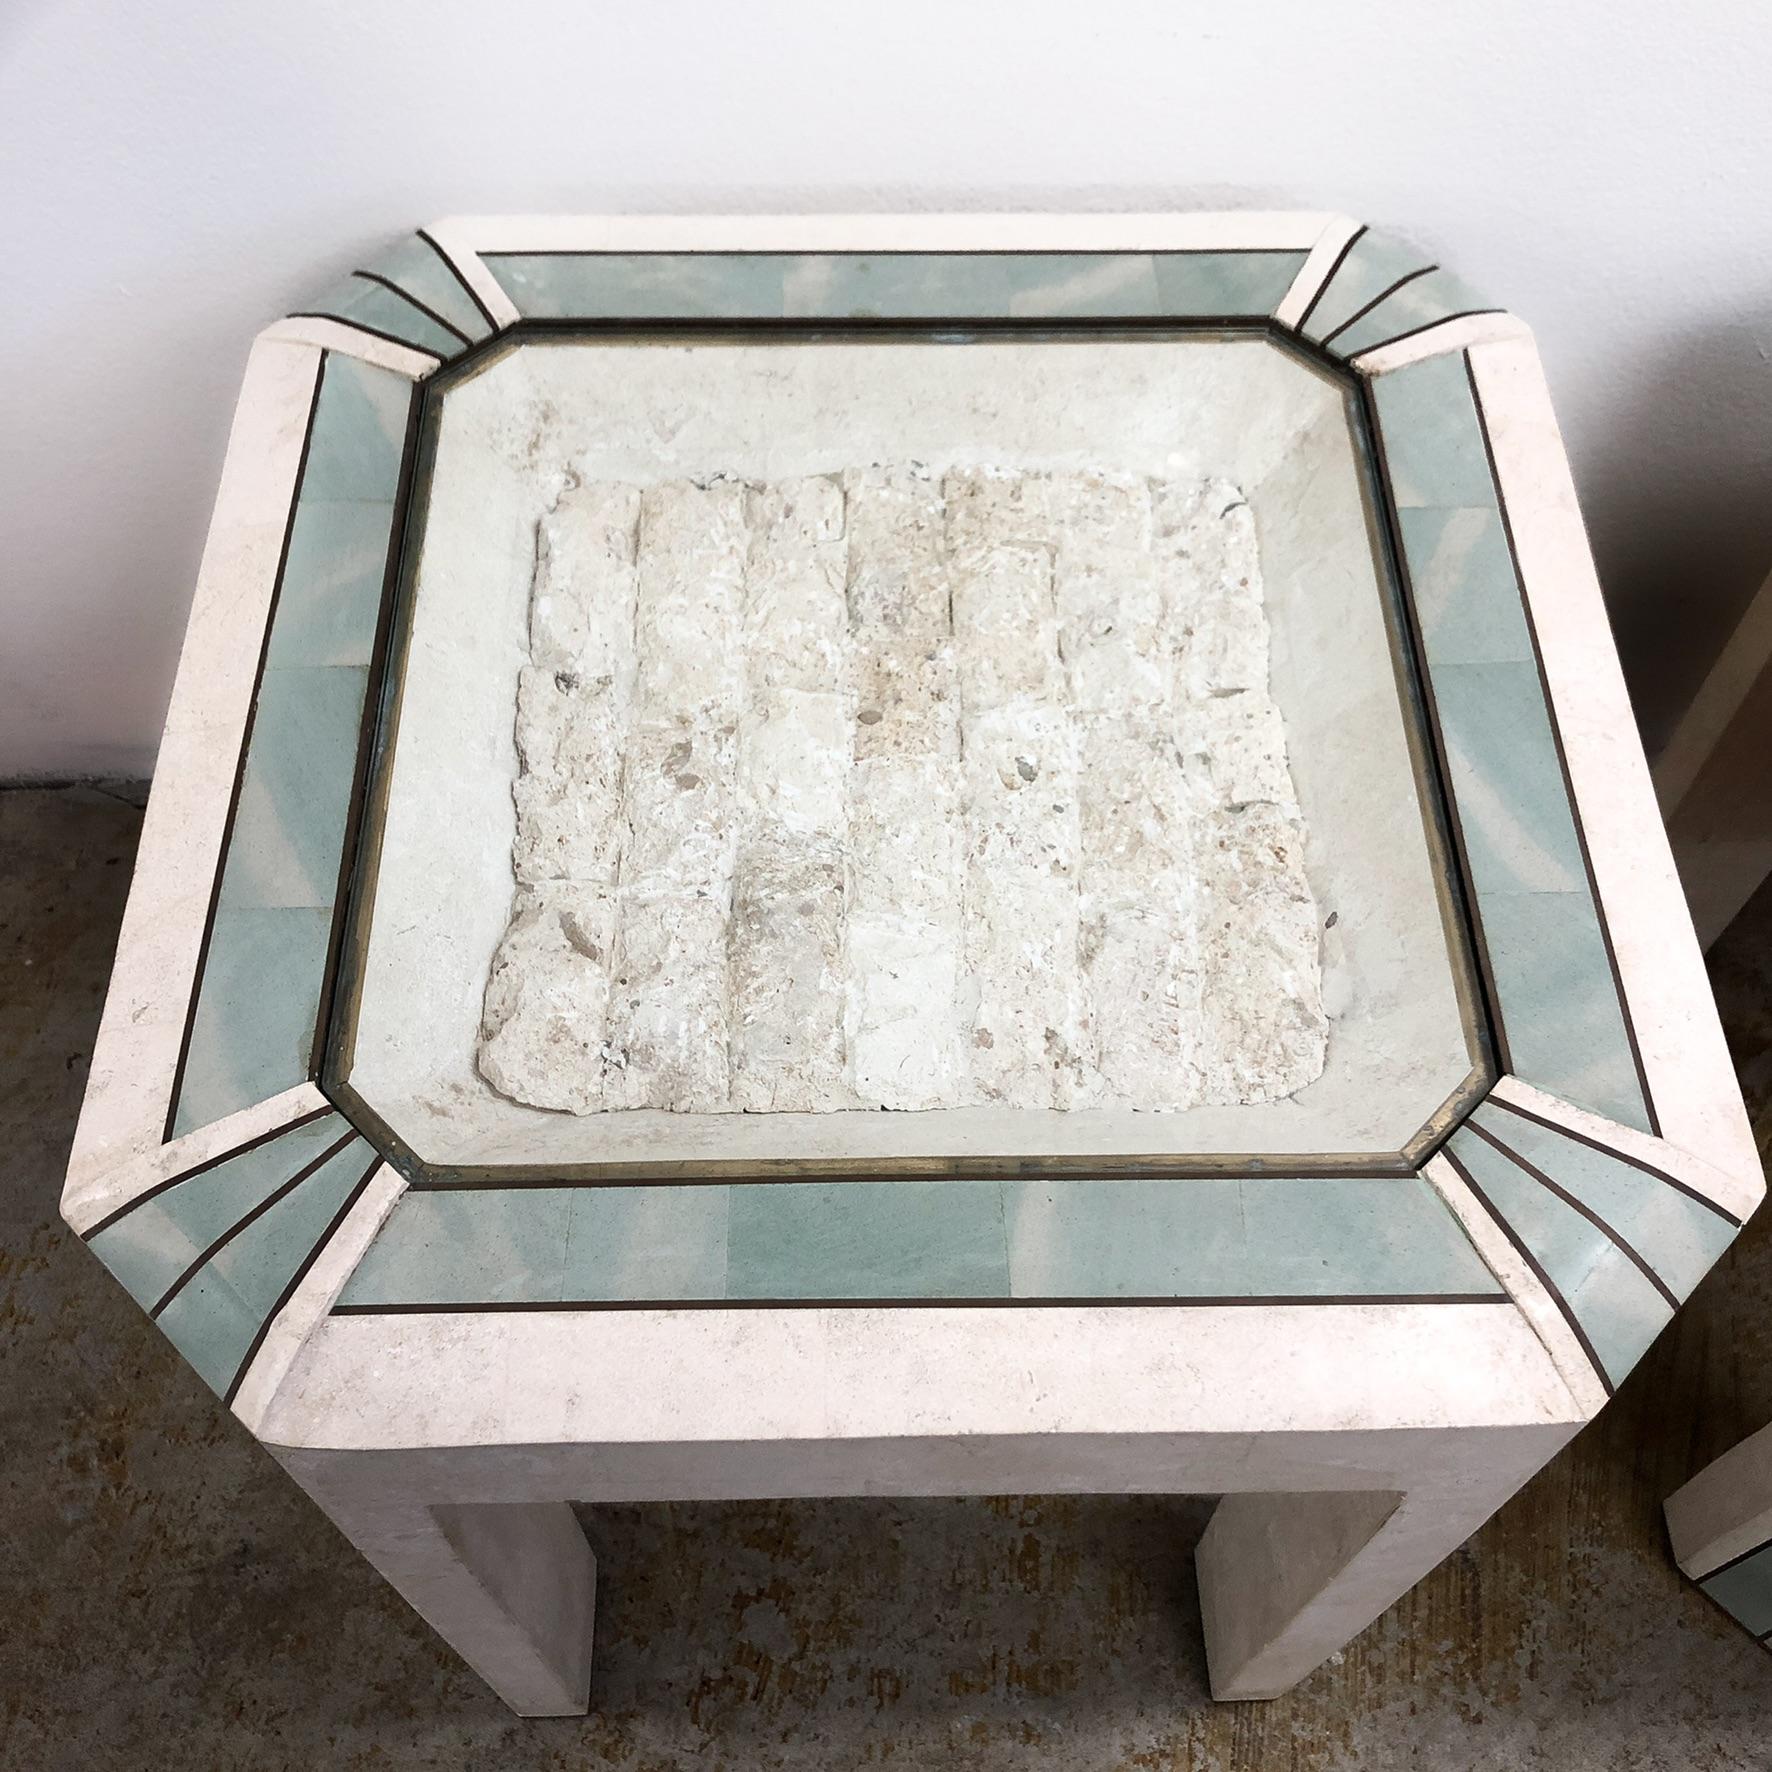 Pair of tessellated stone clad side tables by Maitland Smith. Made in the 1980s these stunning pieces have brass inlay detailing, and a glass top to each protecting and internal stone feature.